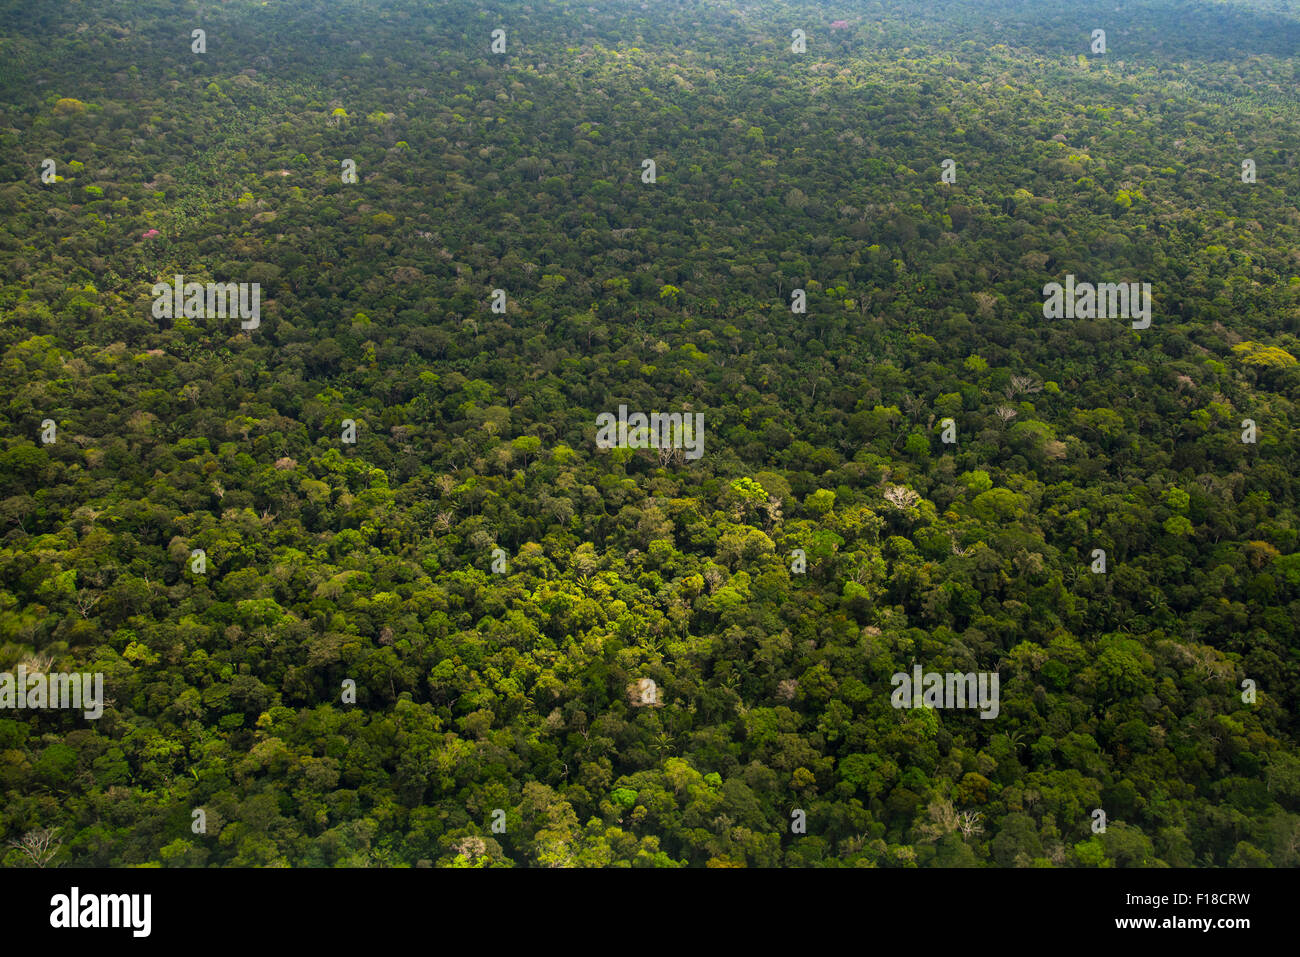 Amazon Rainforest aerial. Primary forest between Iquitos, Peru and Brazilian border Stock Photo